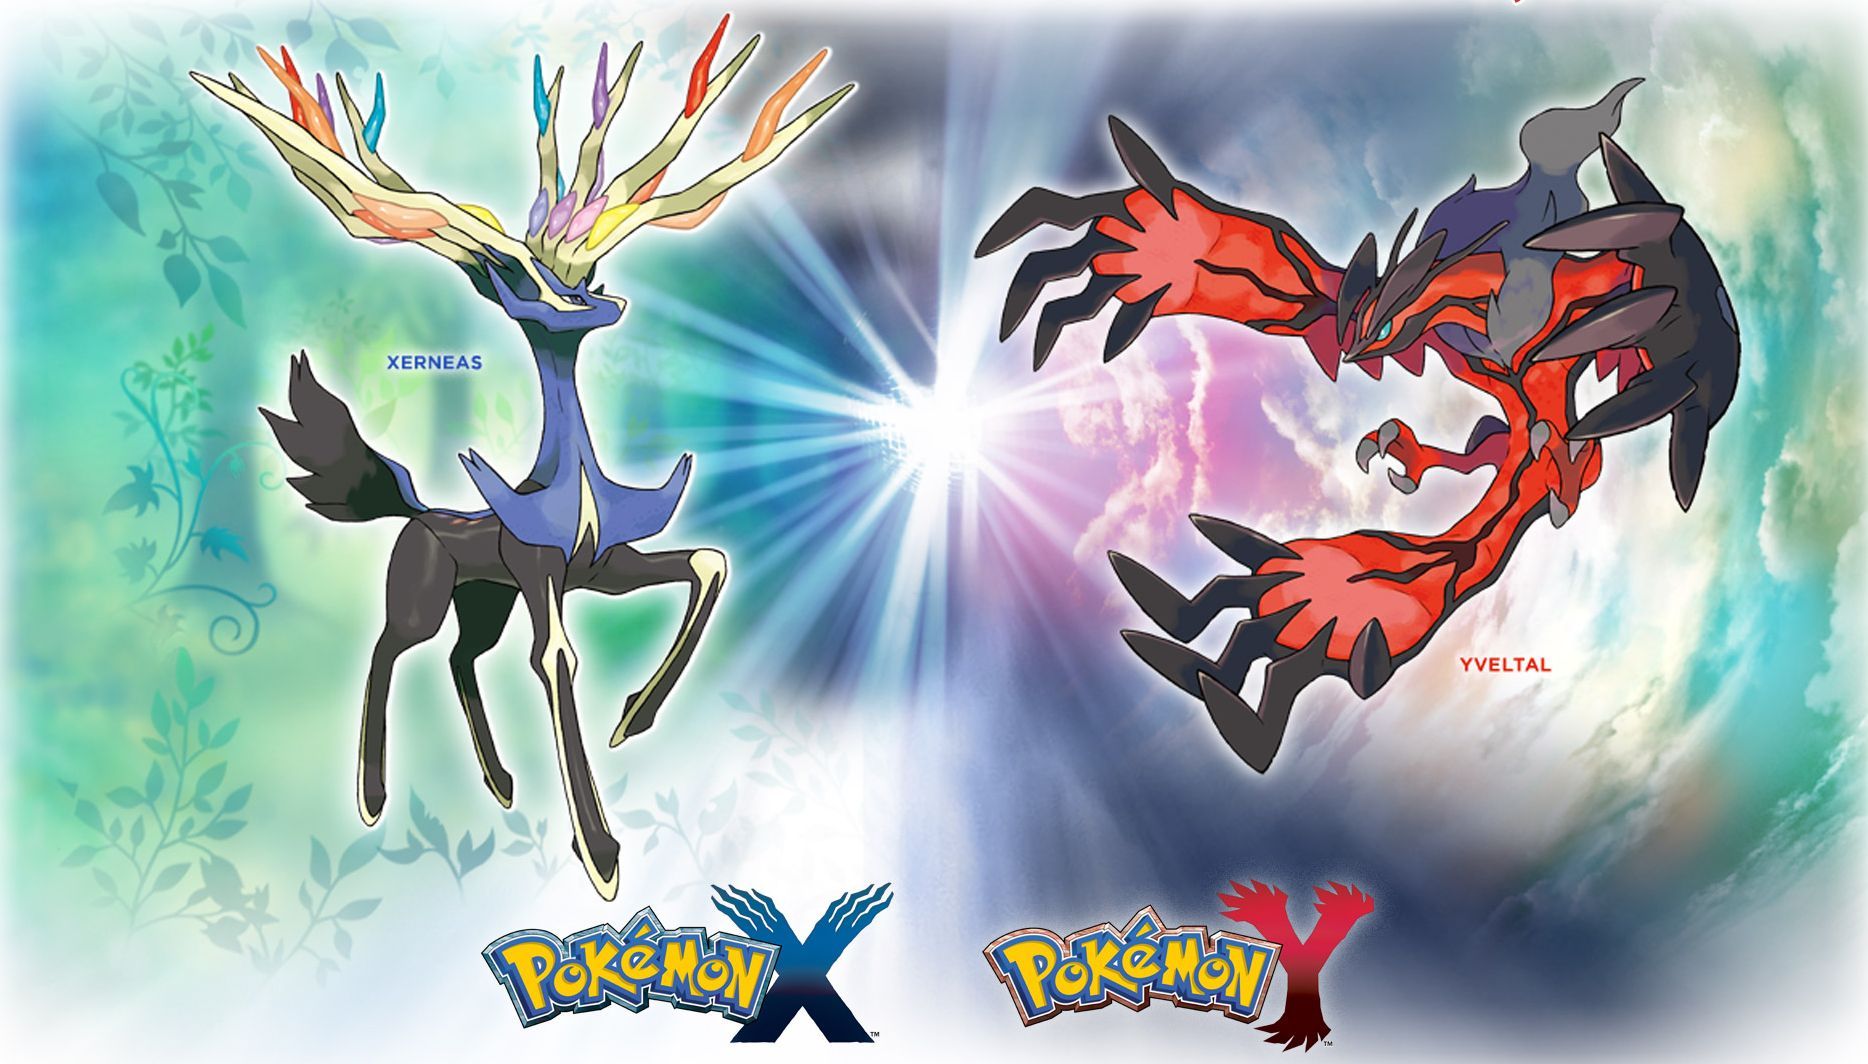 Pokemon X and Y isn't a reboot of the franchise, Pokemon Company exec says  - Polygon